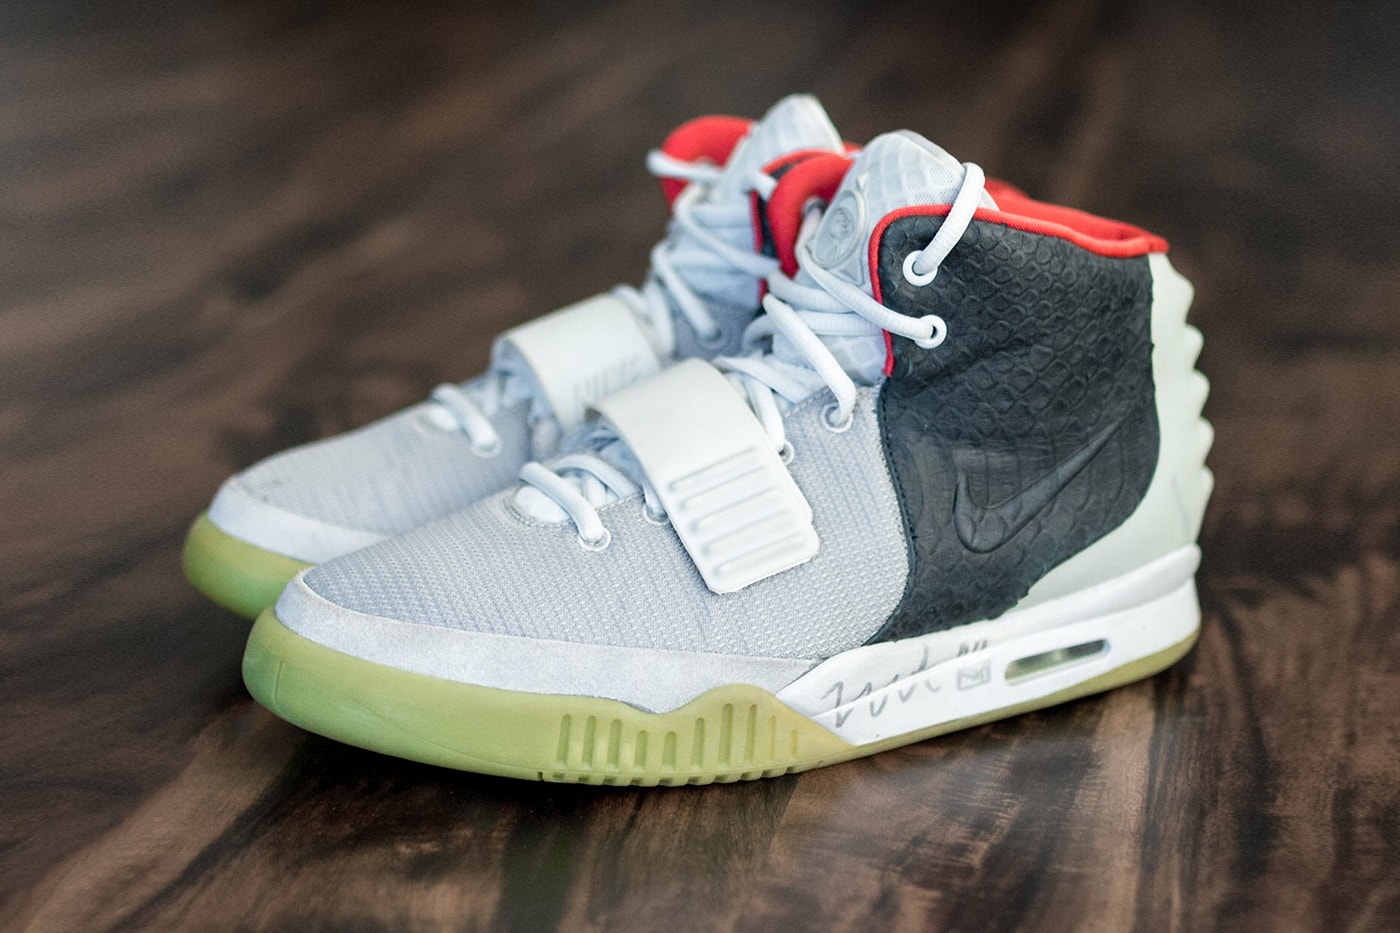 The Evolution of Nike Air Yeezy 2: From Design to Street Style Phenomenon